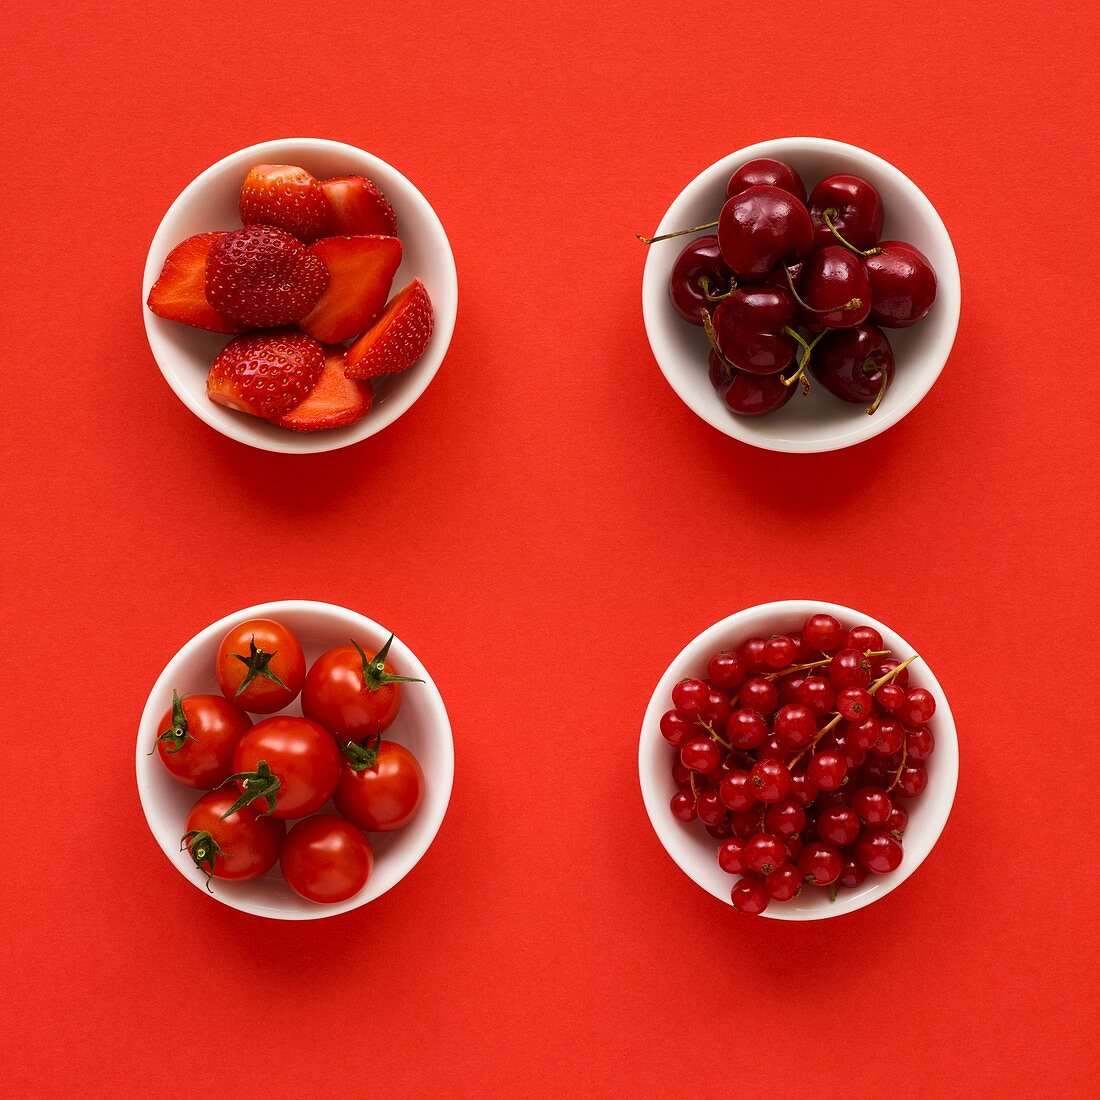 Red produce in dishes